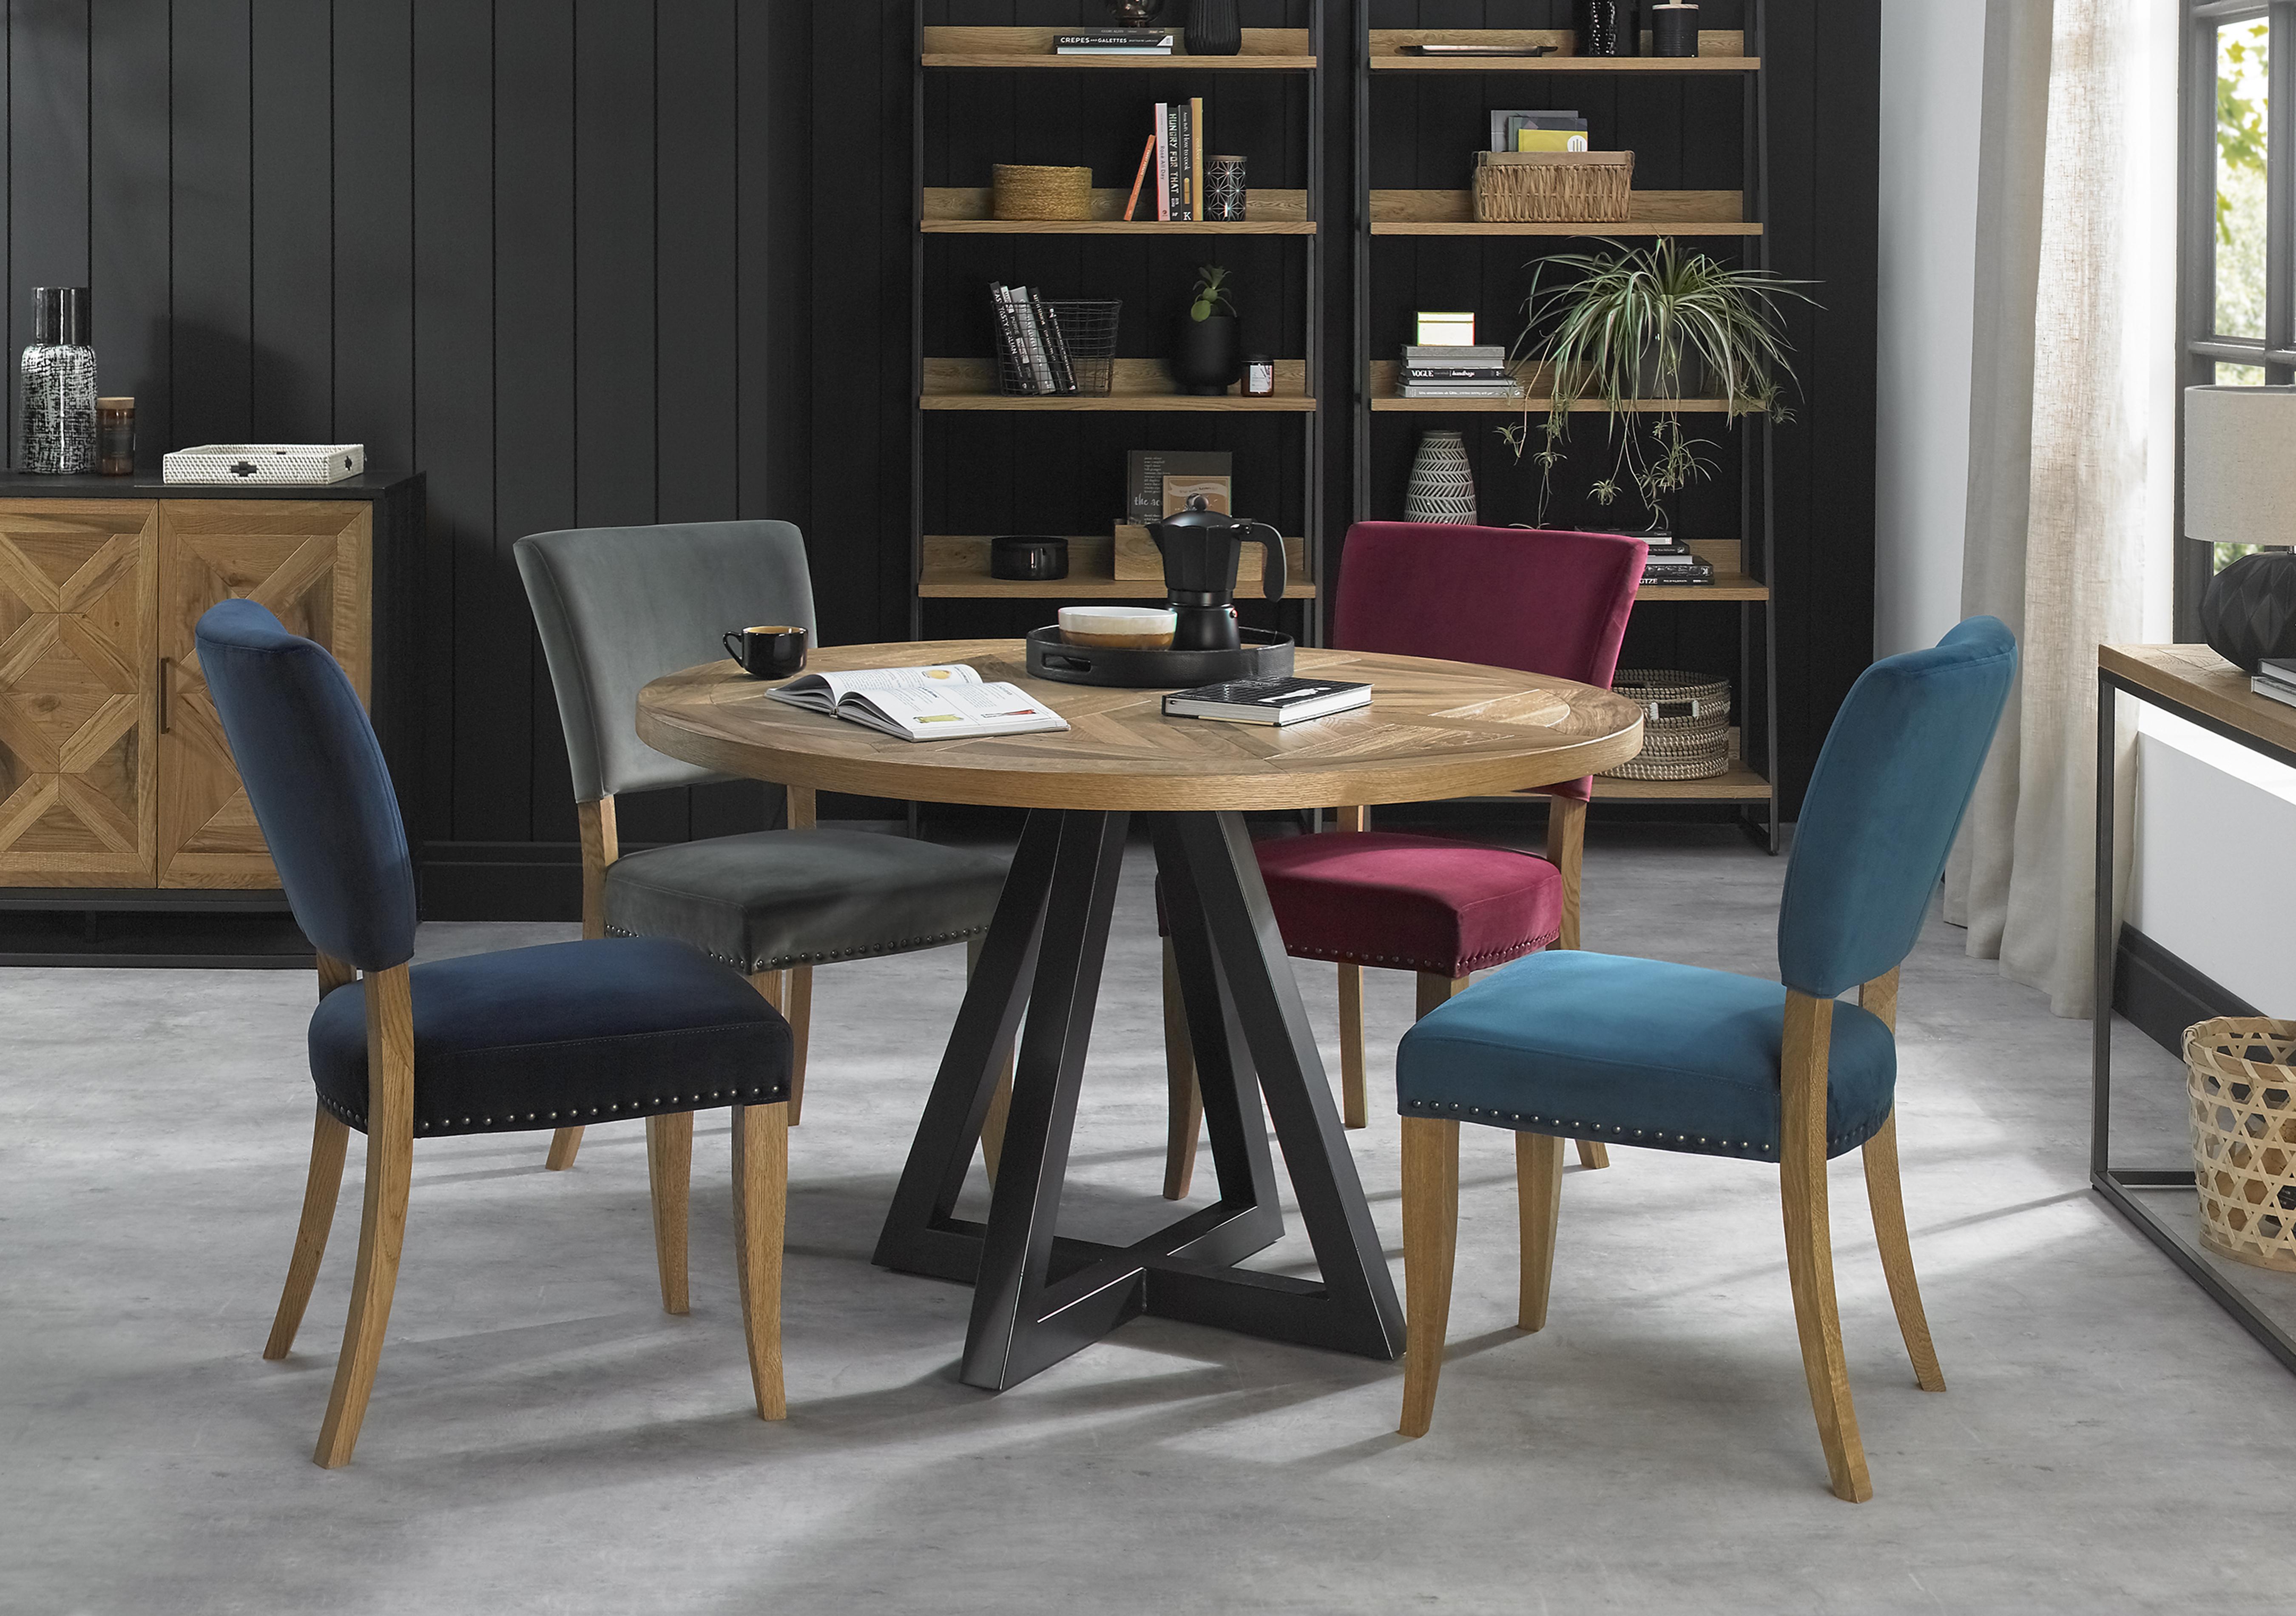 Clever Small Dining Room Ideas At Furniture Village Furniture Village